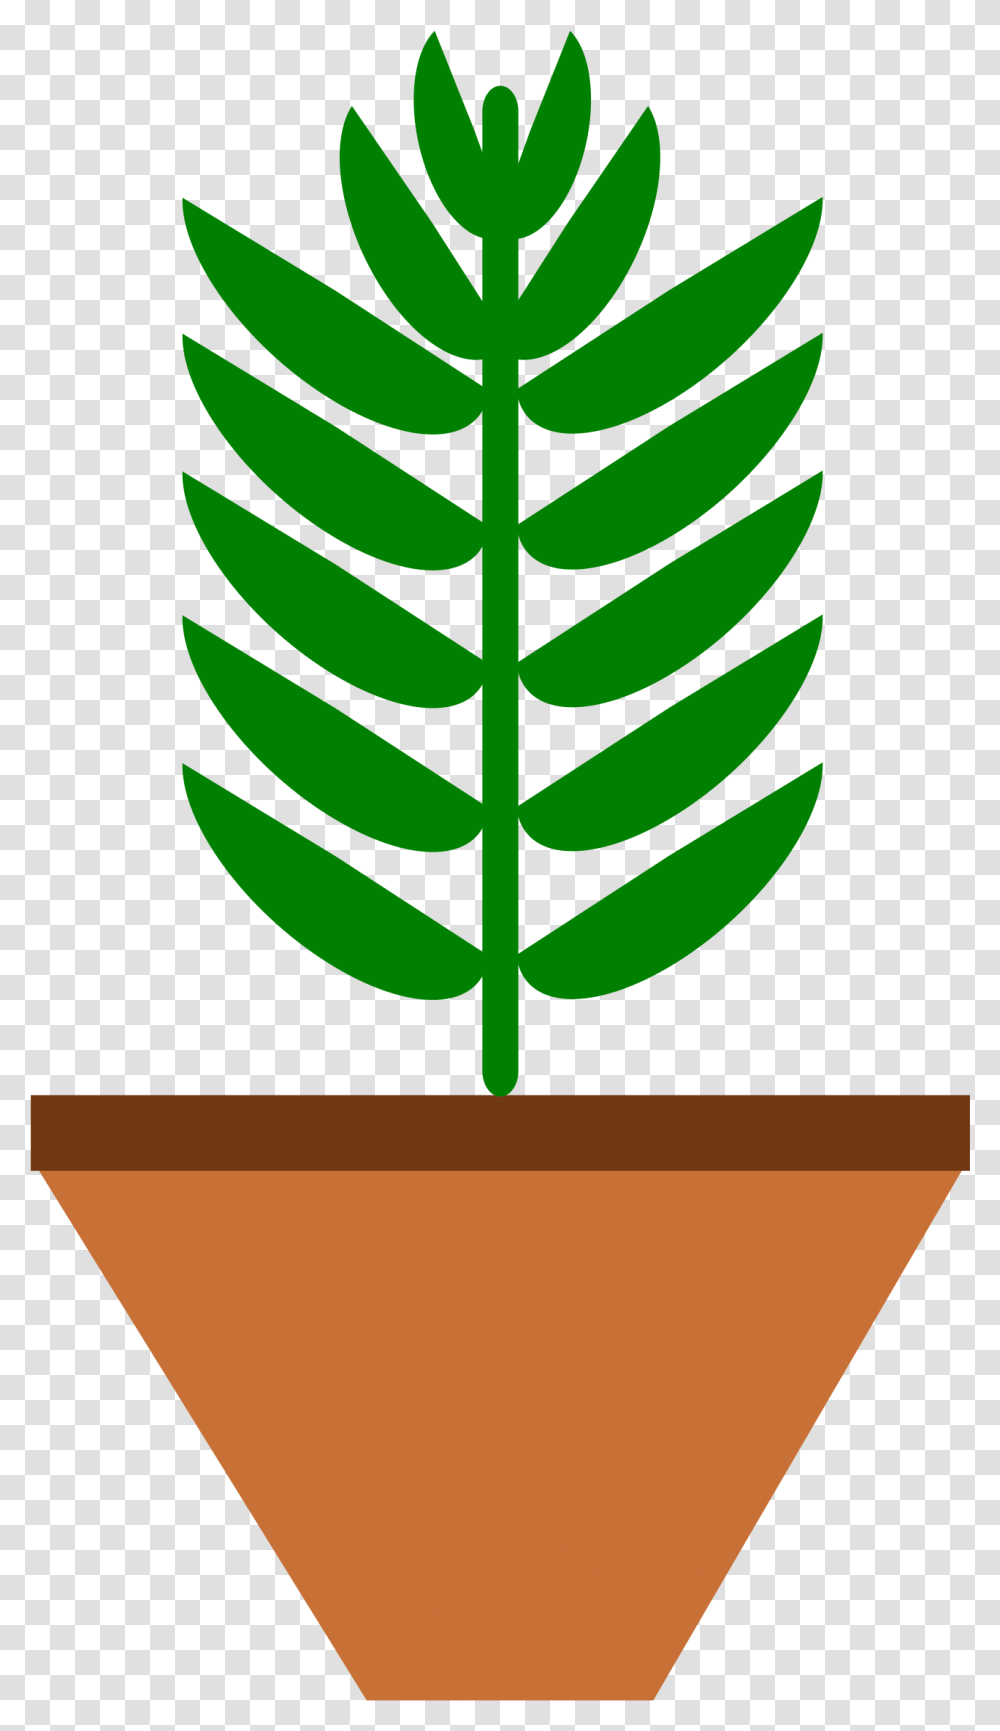 Potted Plant Leaves Only 3 Color With Space On Pot Pot Plant Clip Art, Green, Leaf, Fern Transparent Png